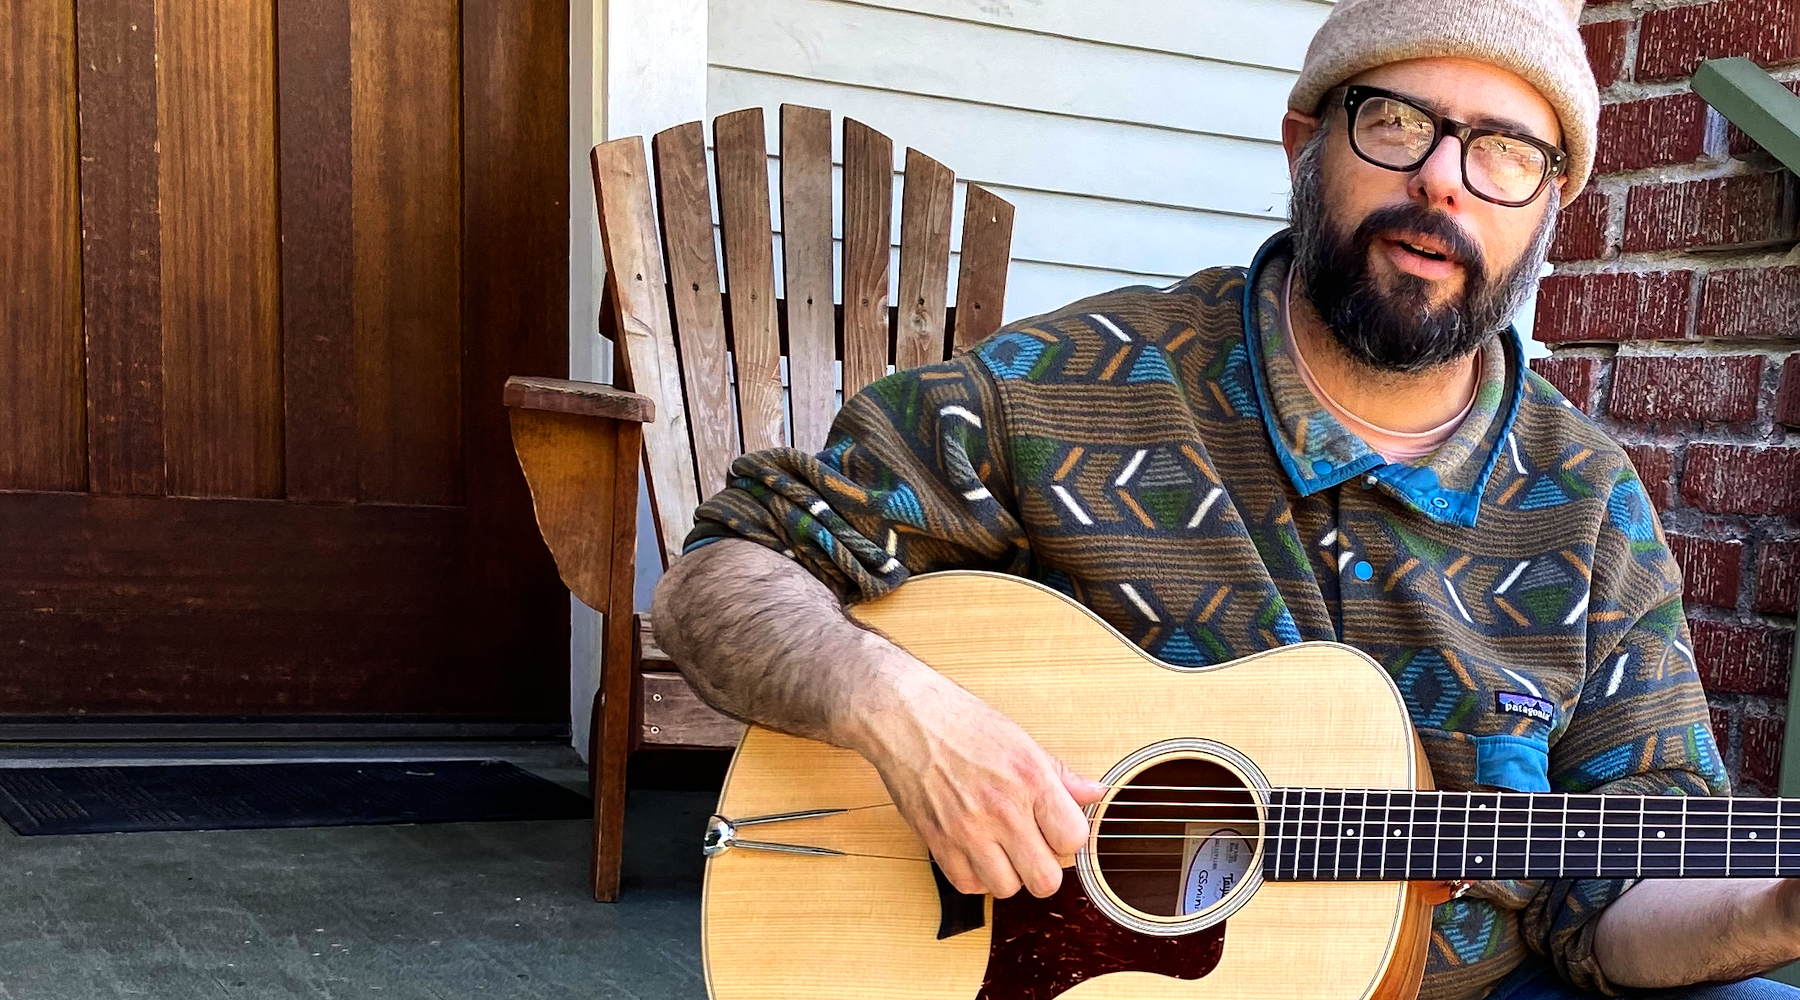 Bearded man on porch playing an acoustic guitar with the TurboTail installed